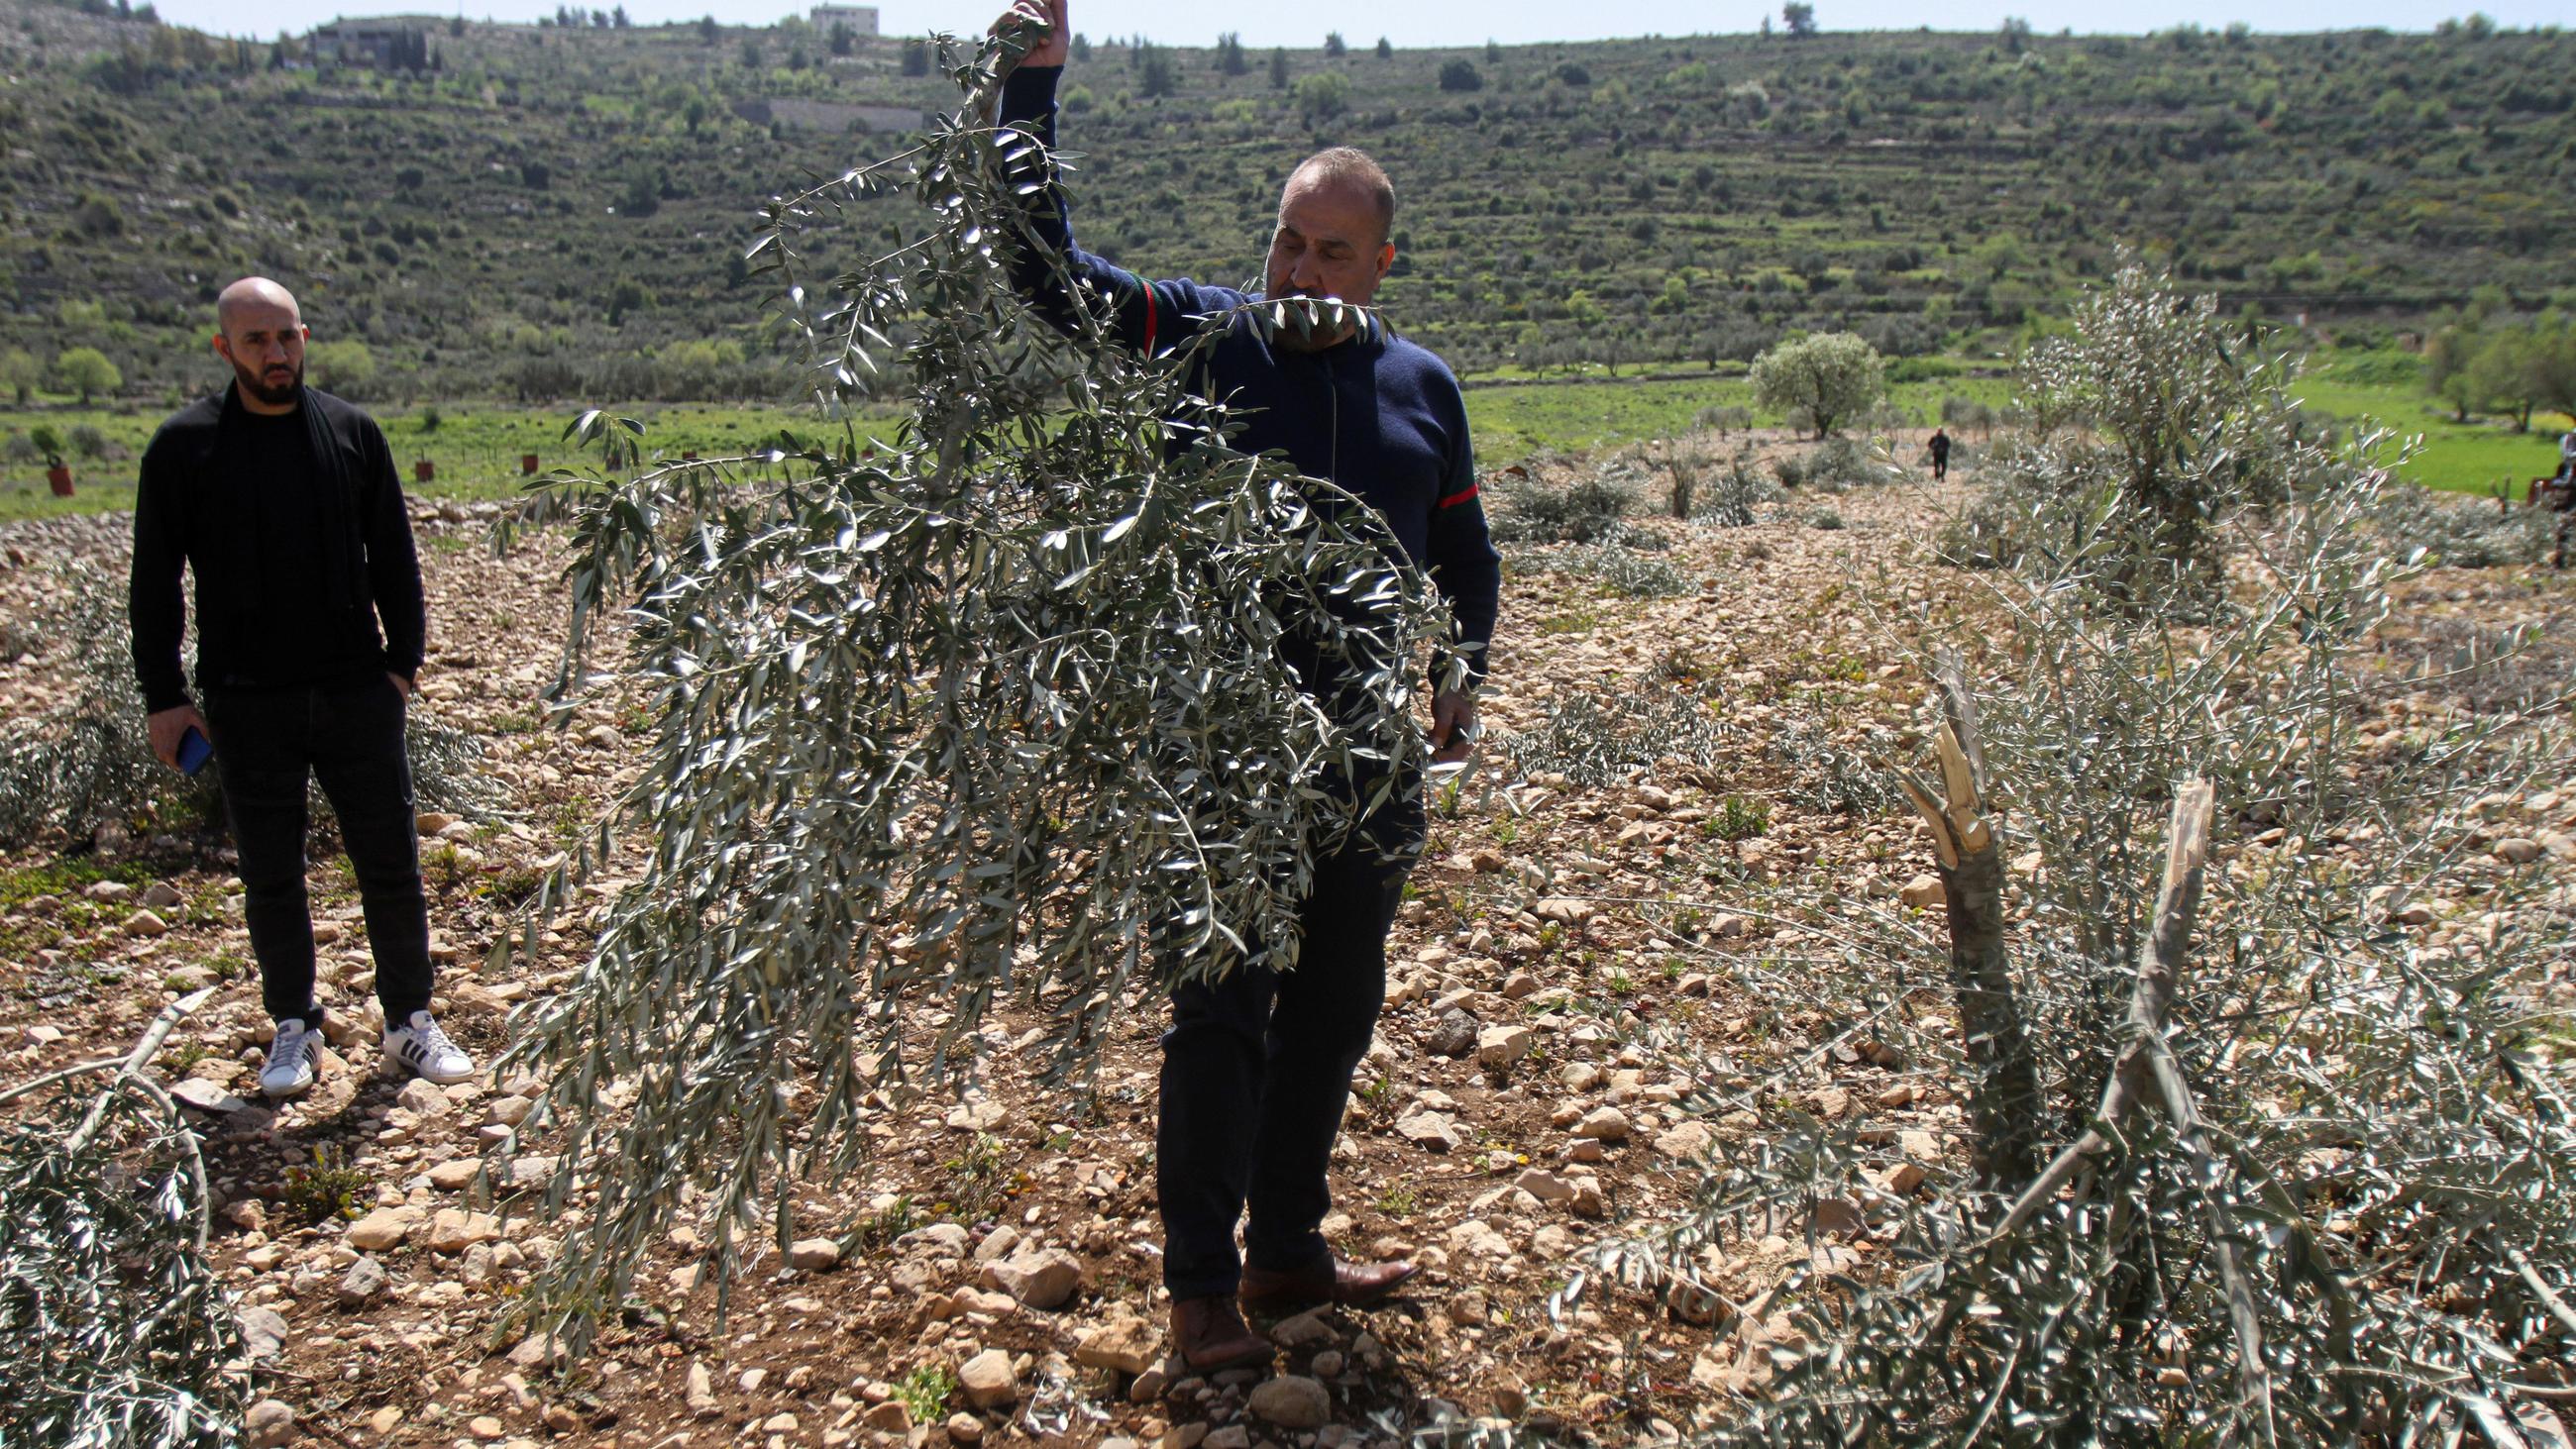 Palestinians inspect the destroyed olive trees in their field in Marda village south of Nablus in the occupied West Bank on 30 March 2022 (Reuters)